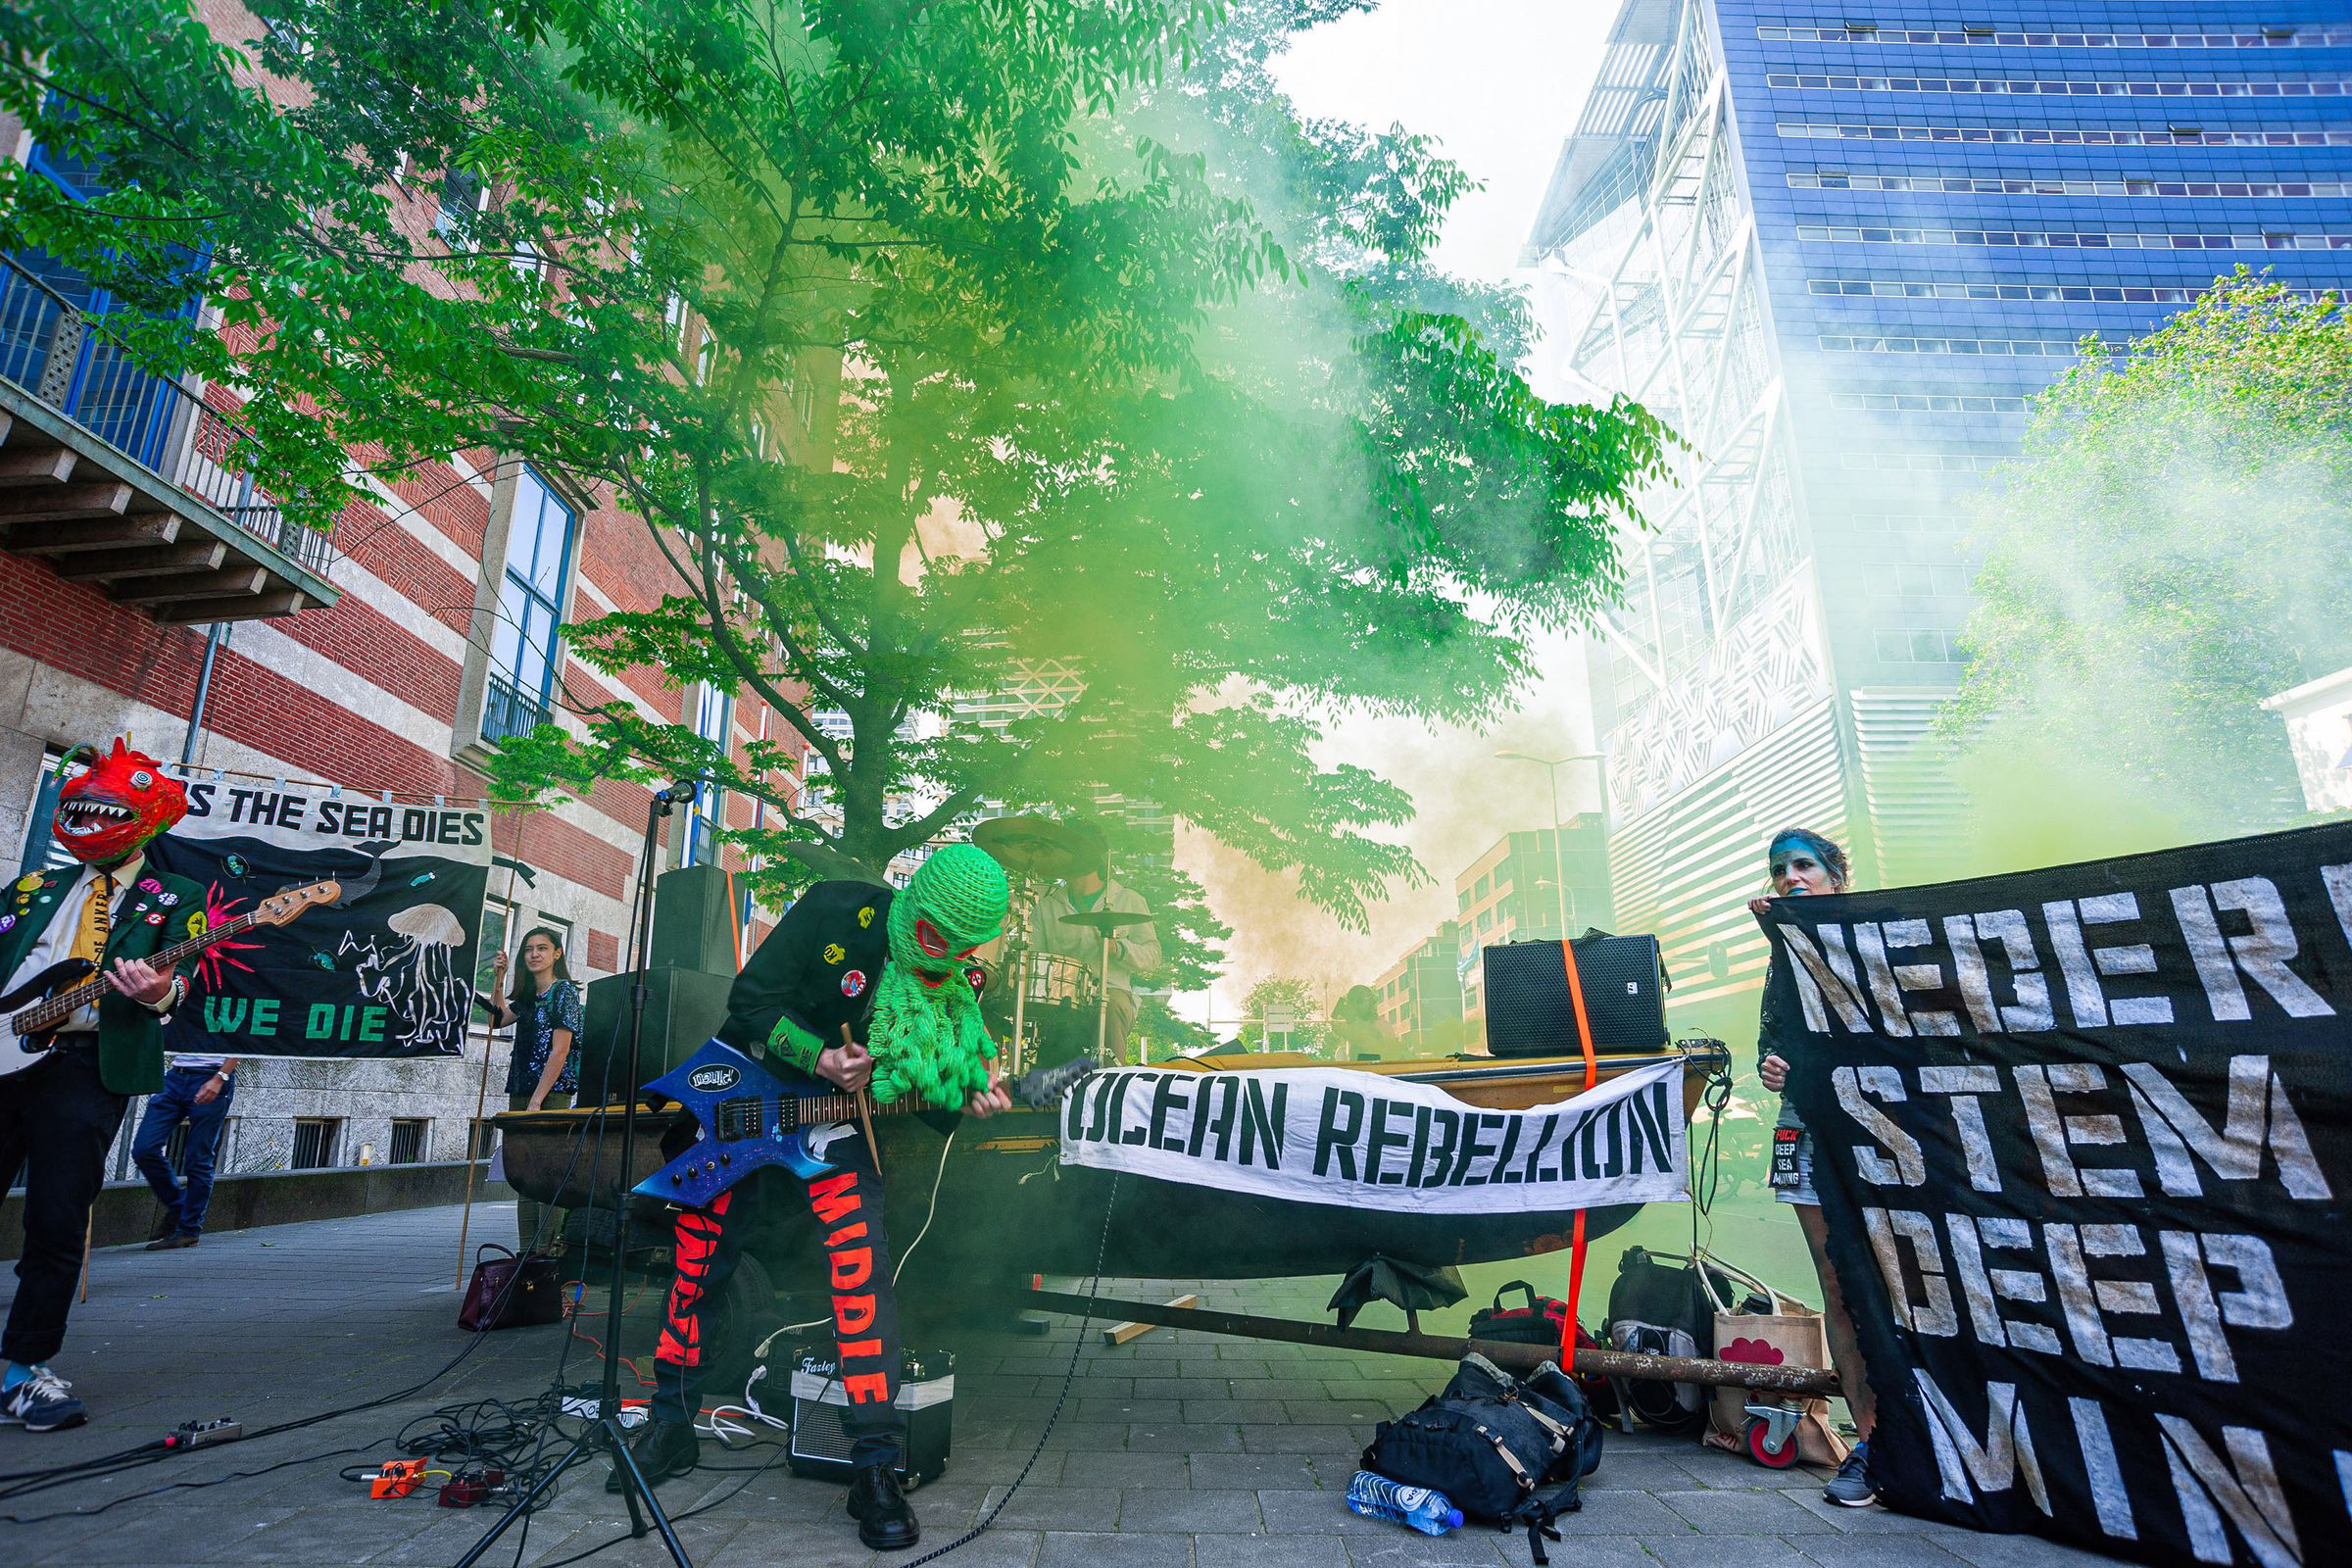 Band members wearing masks play instruments in a haze of green smoke with a banner behiind them that says “ocean rebellion.”